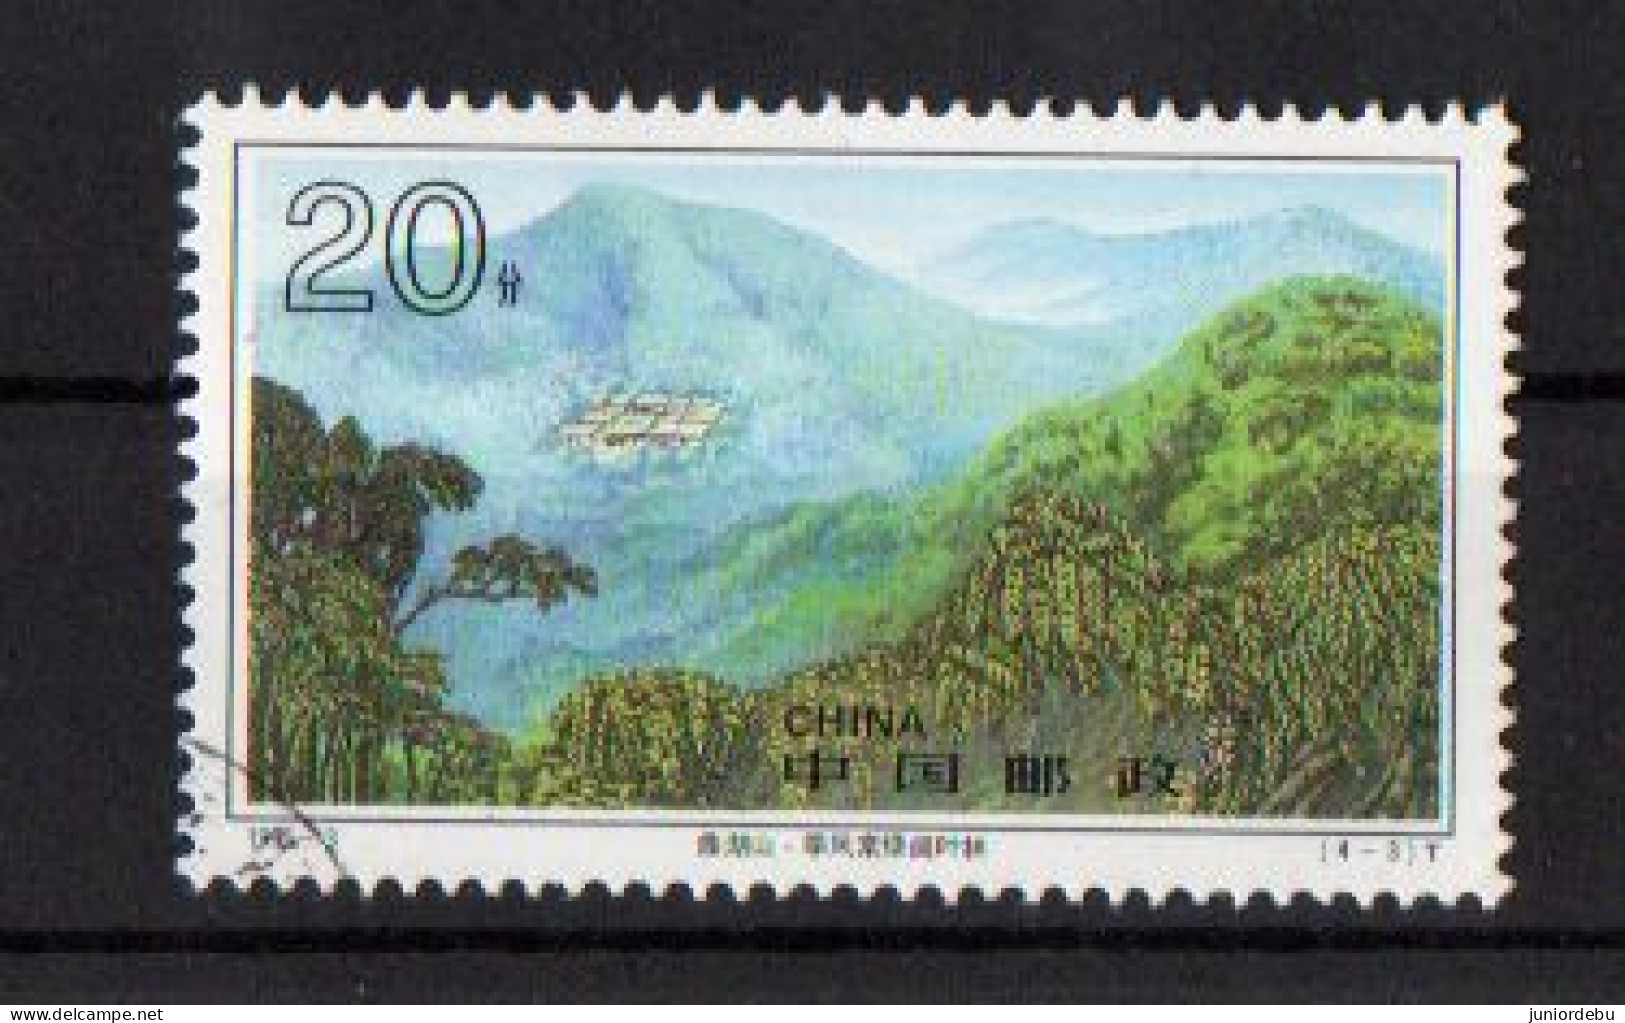 China - 1995 -  Mount Dinghu  - Used. - Used Stamps